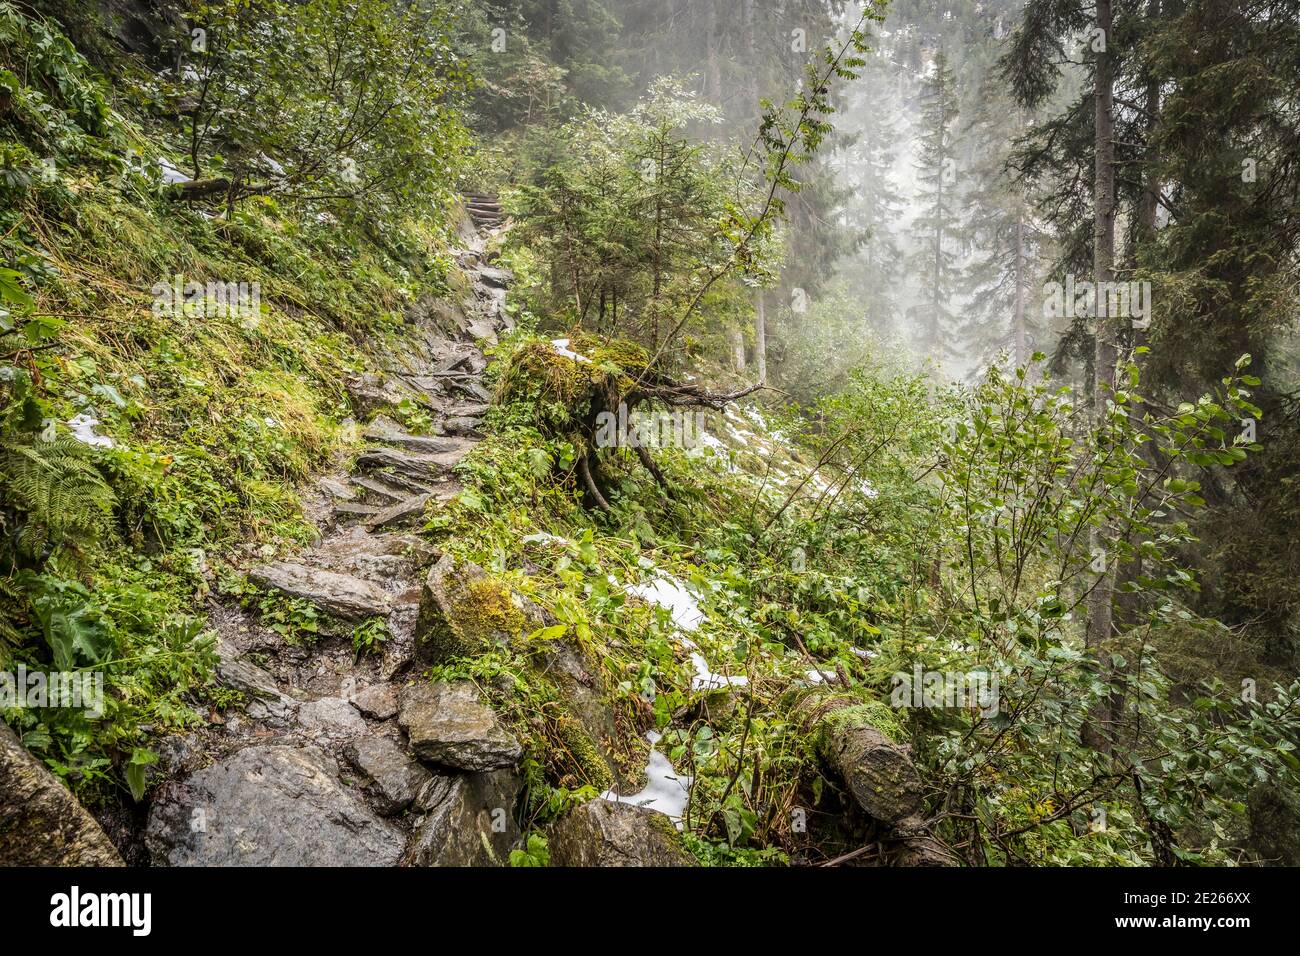 Steep Slope On Rocky Image & Photo (Free Trial)